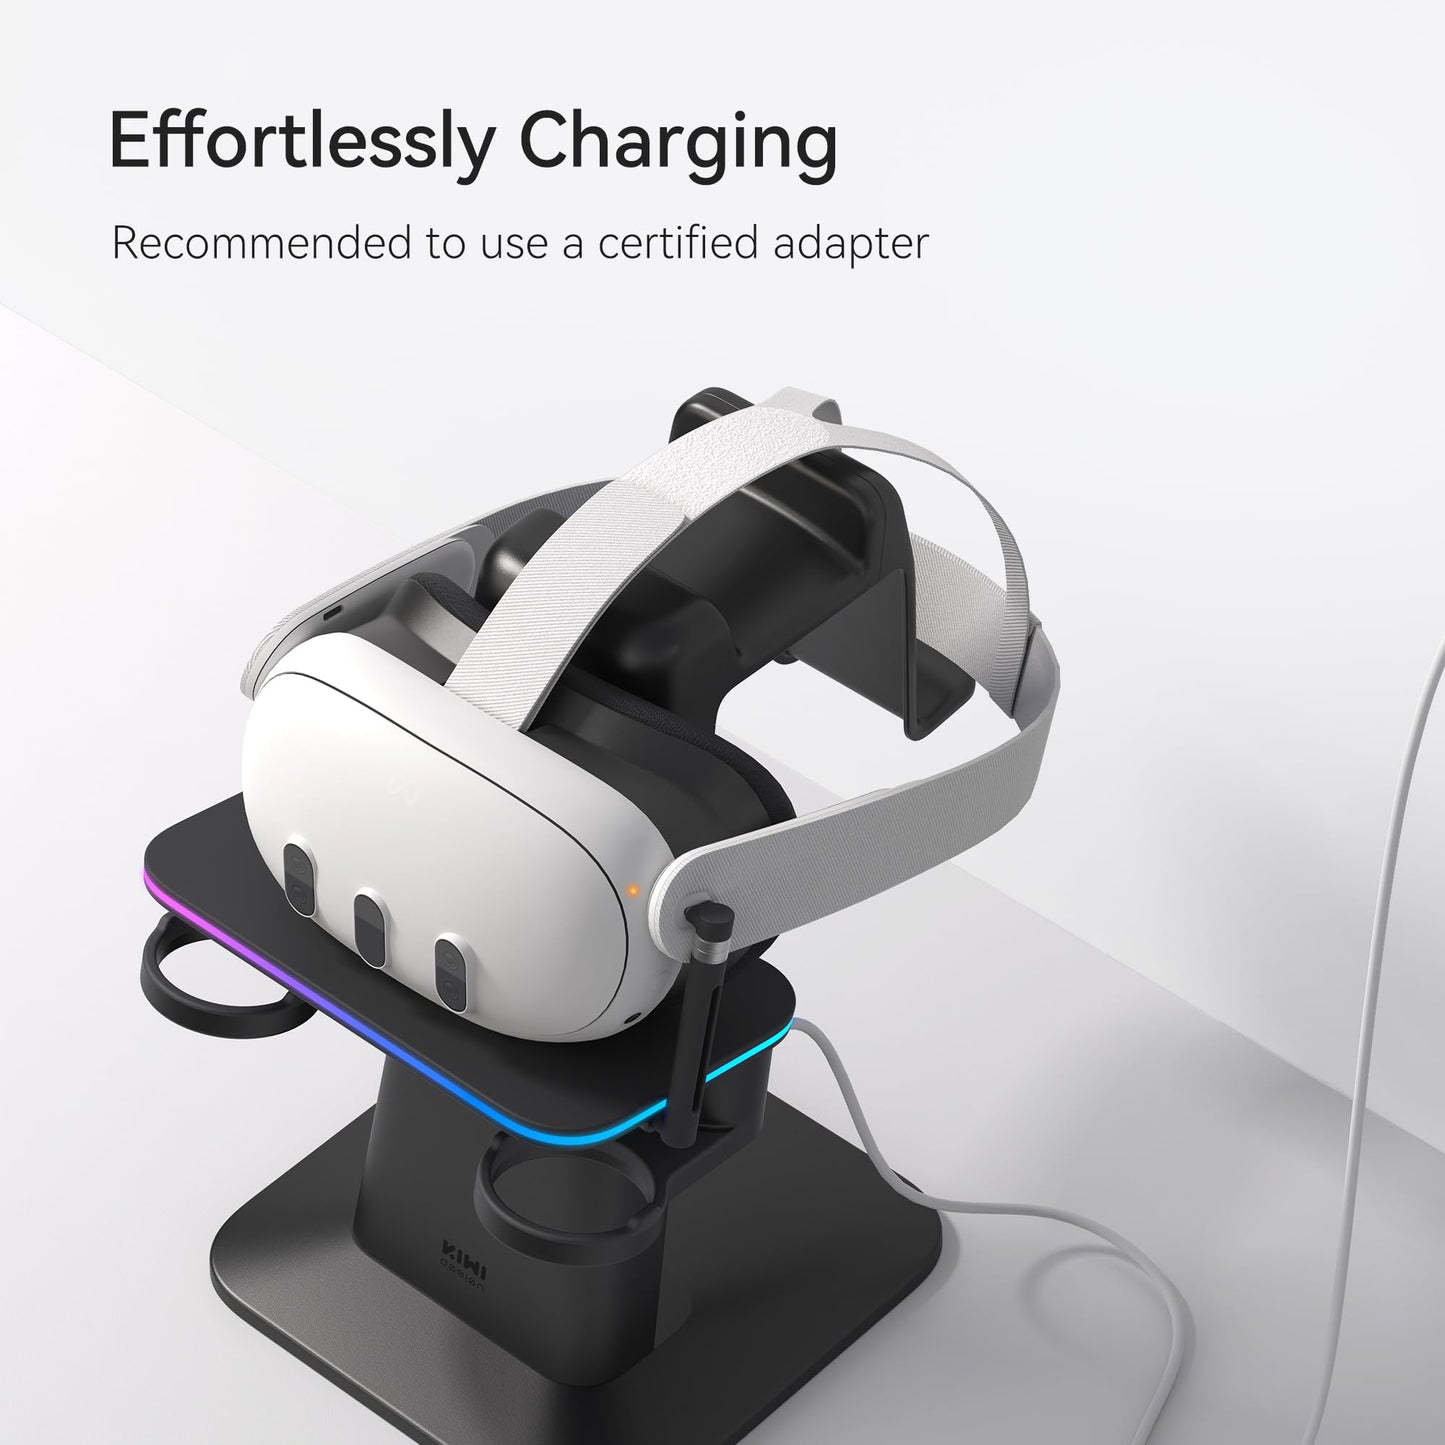 KIWI design Charging Dock for Meta Oculus Quest 3/Quest 2/Quest Pro Accessories, Meta Officially Co-Branded, RGB Vertical Charging Stand and Controller Holder - ARVRedtech.com | AR & VR Education Technology